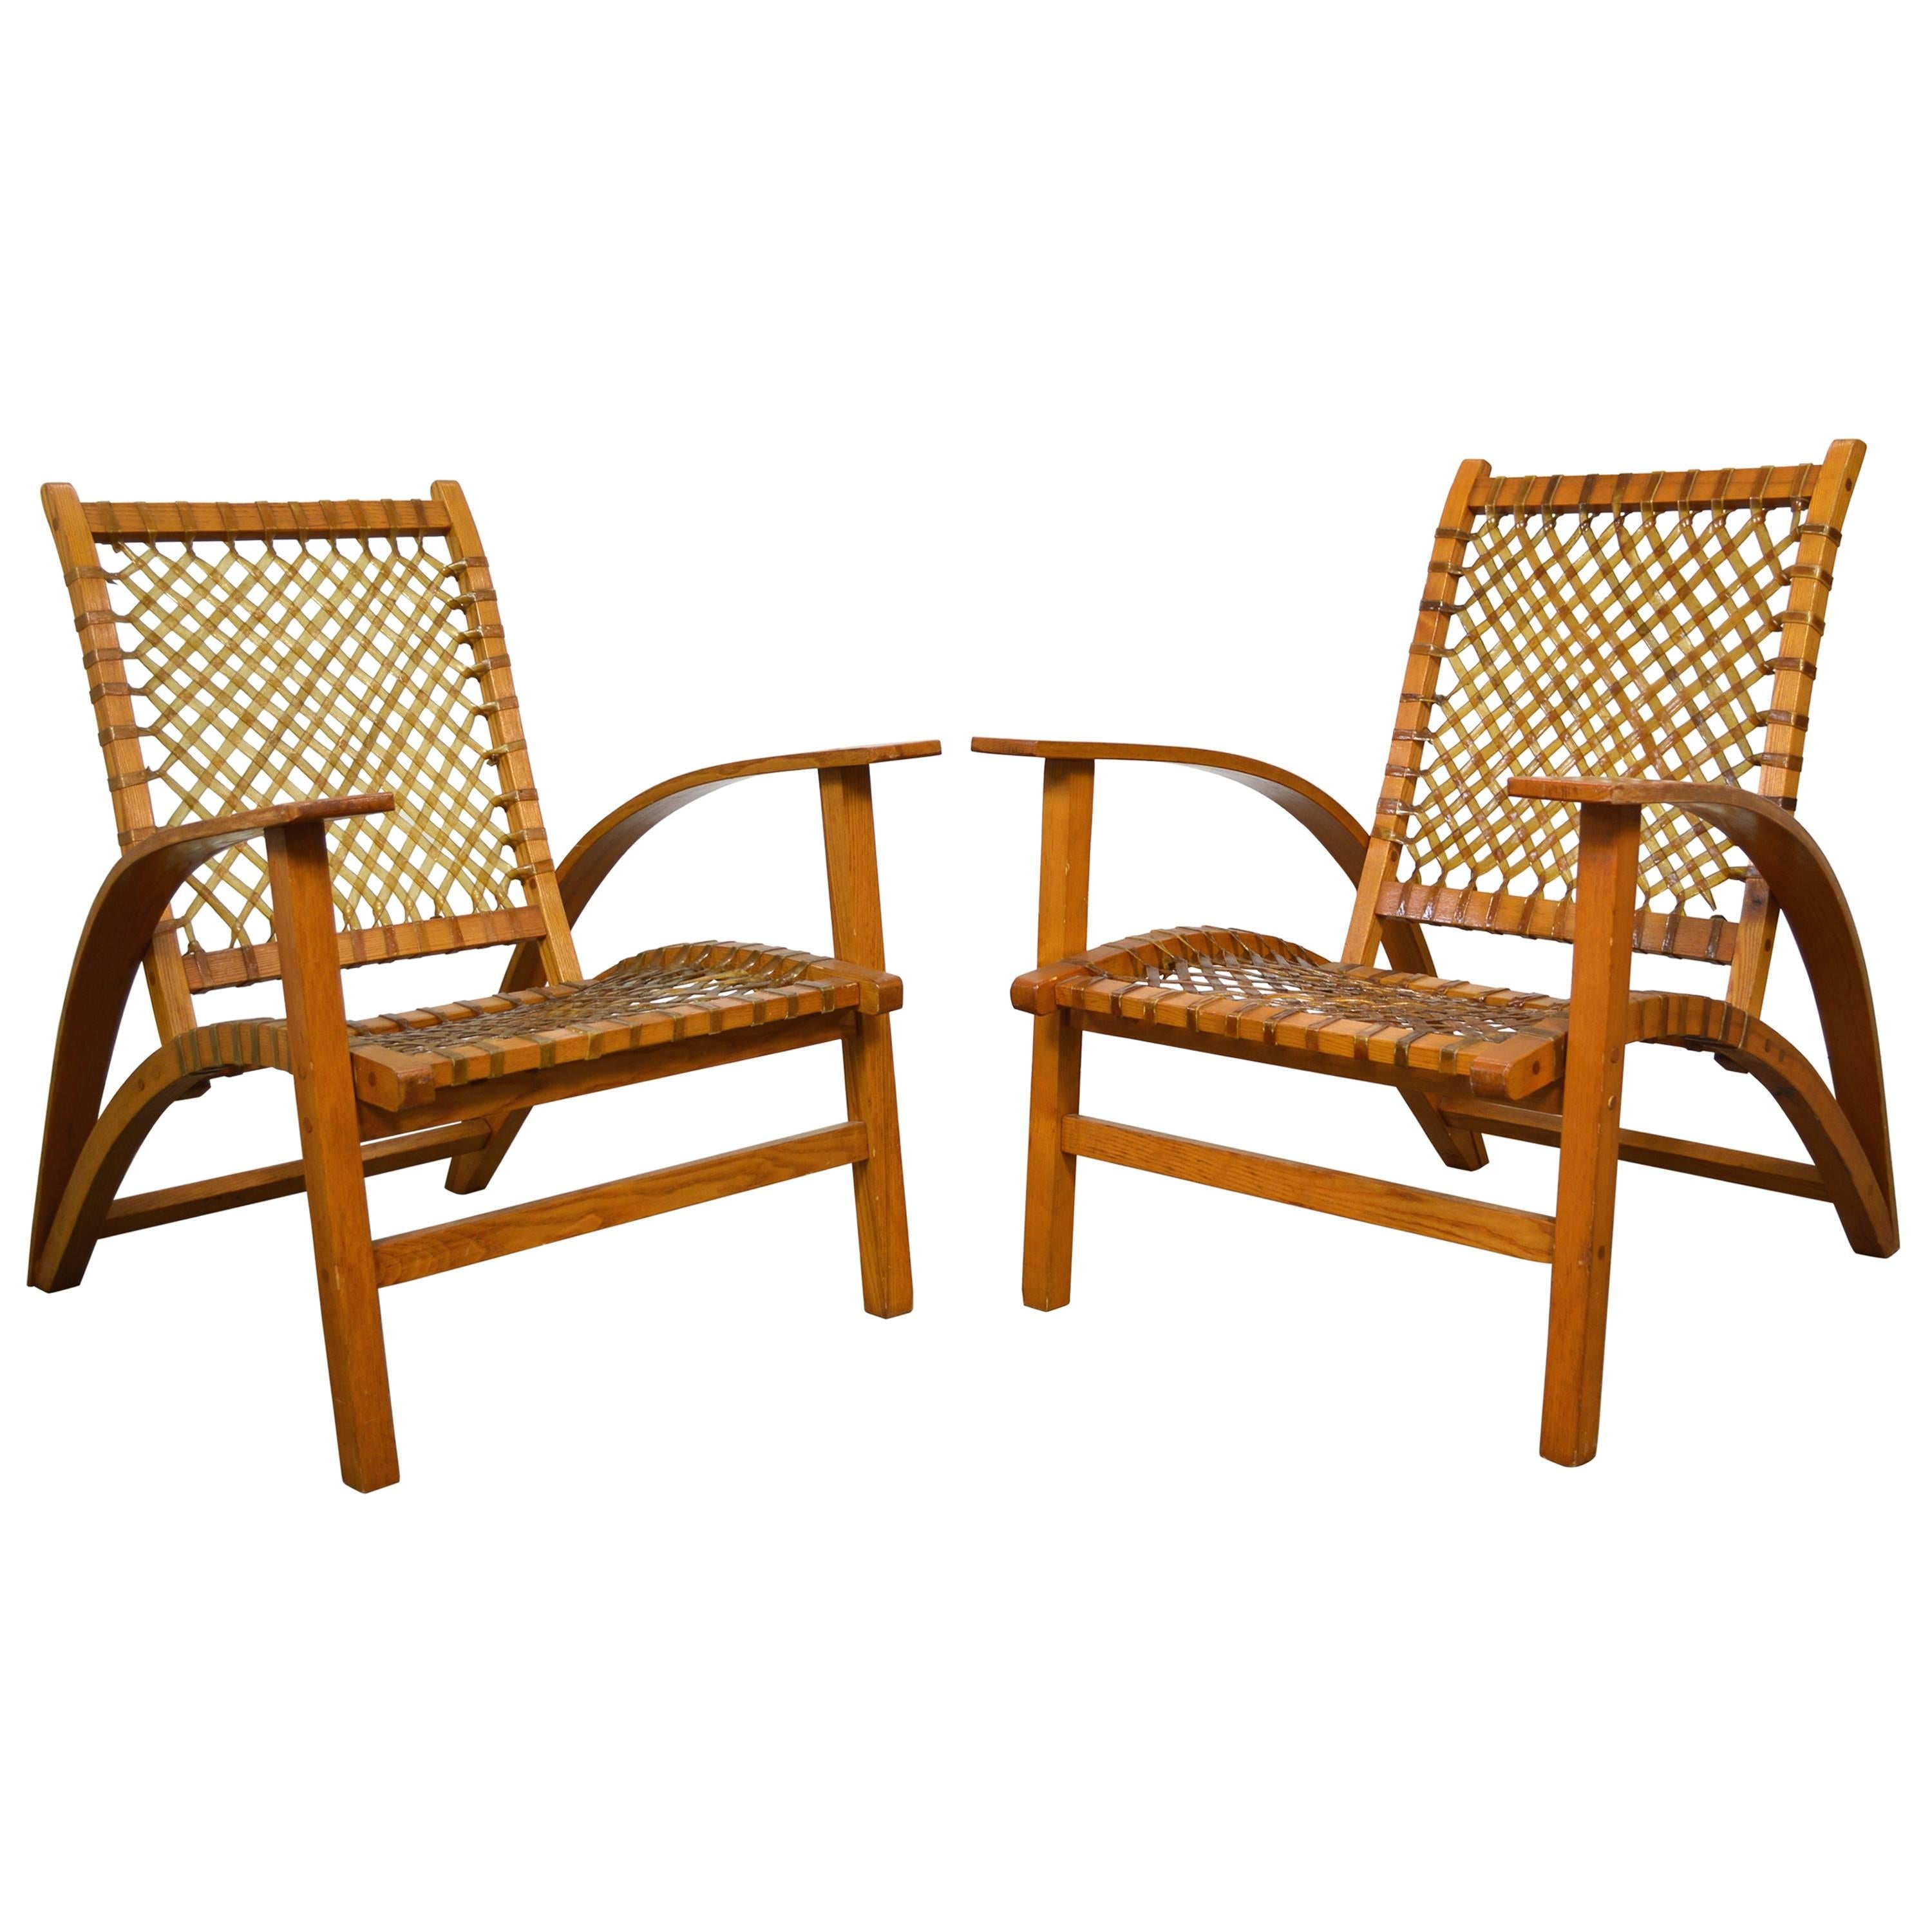 Carl Koch Pair of "Sno-Shu" Chairs and Ottoman For Sale